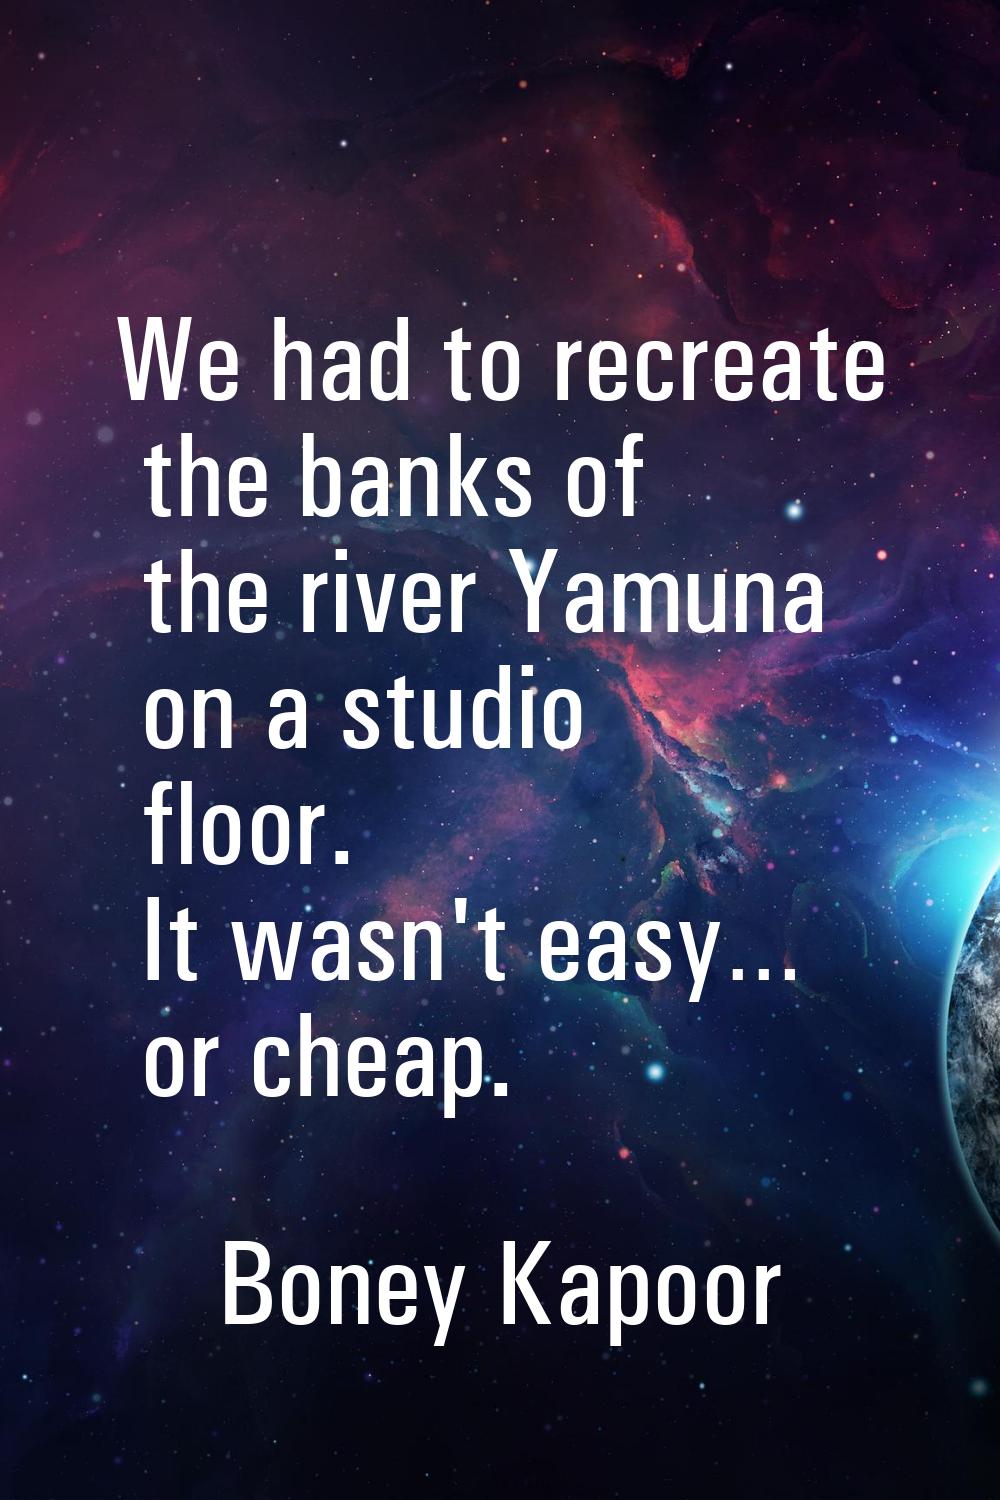 We had to recreate the banks of the river Yamuna on a studio floor. It wasn't easy… or cheap.